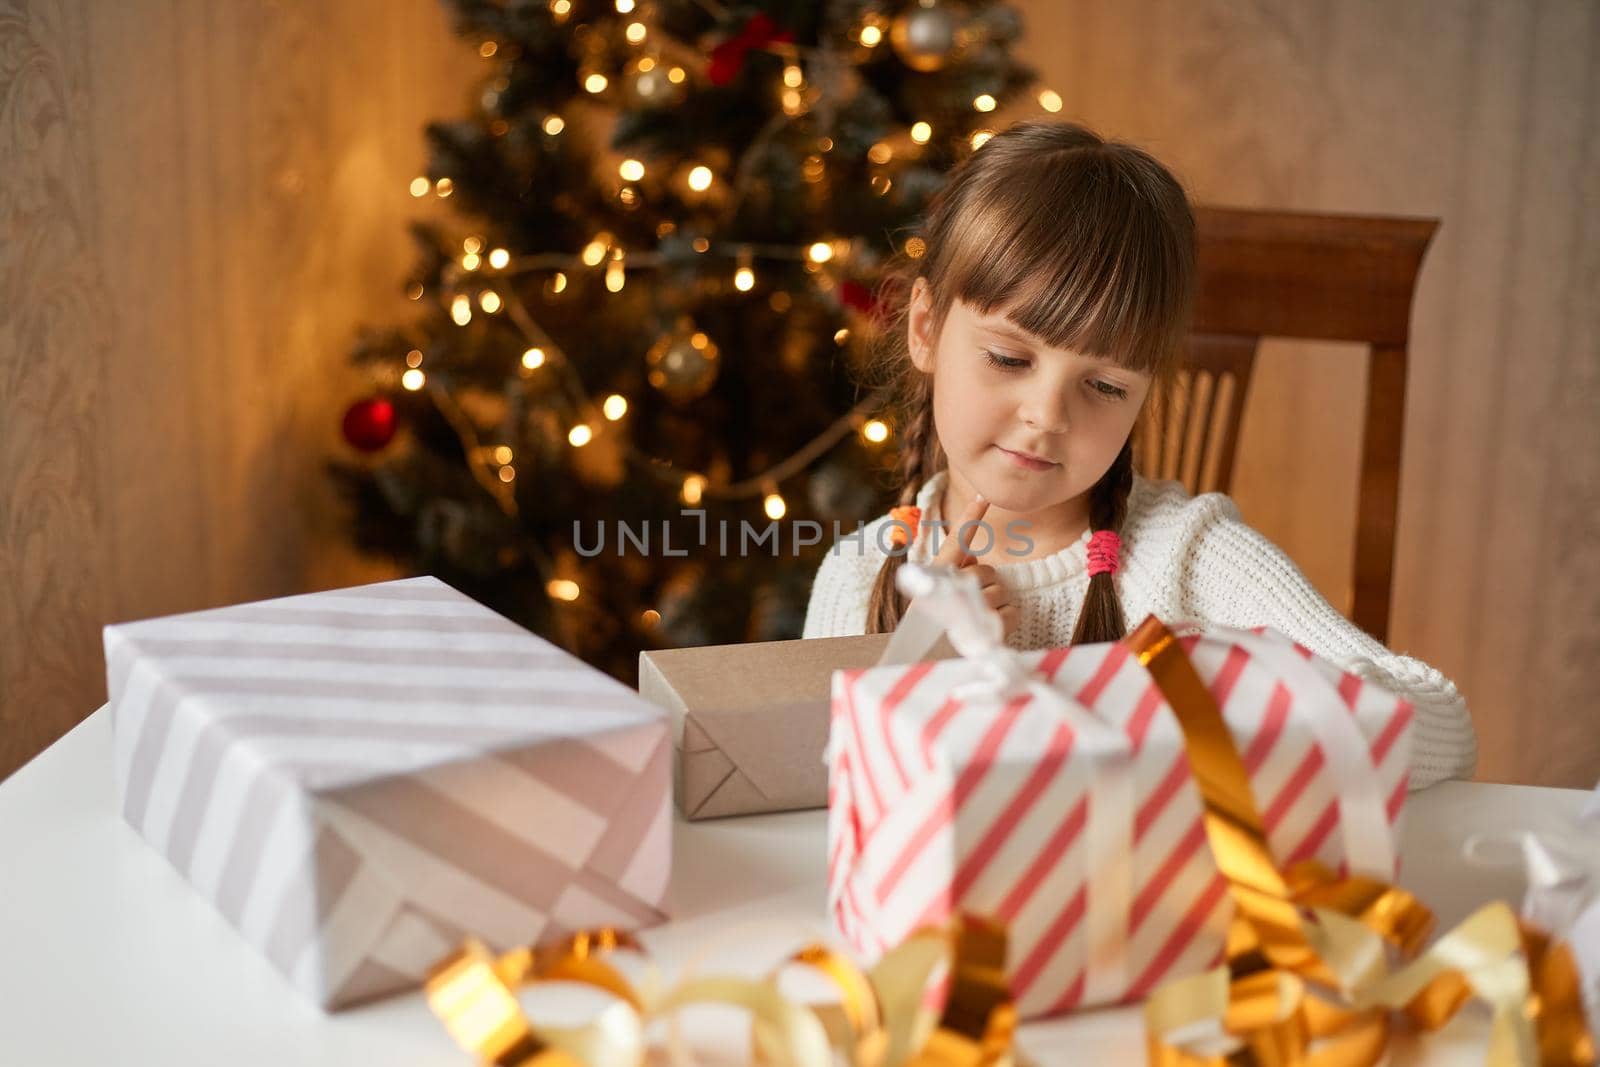 Charming child pack Christmas gifts in festive room, looks at boxes, wearing casual attire, having dark hair an two pigtails, presents for new year tree. by sementsovalesia